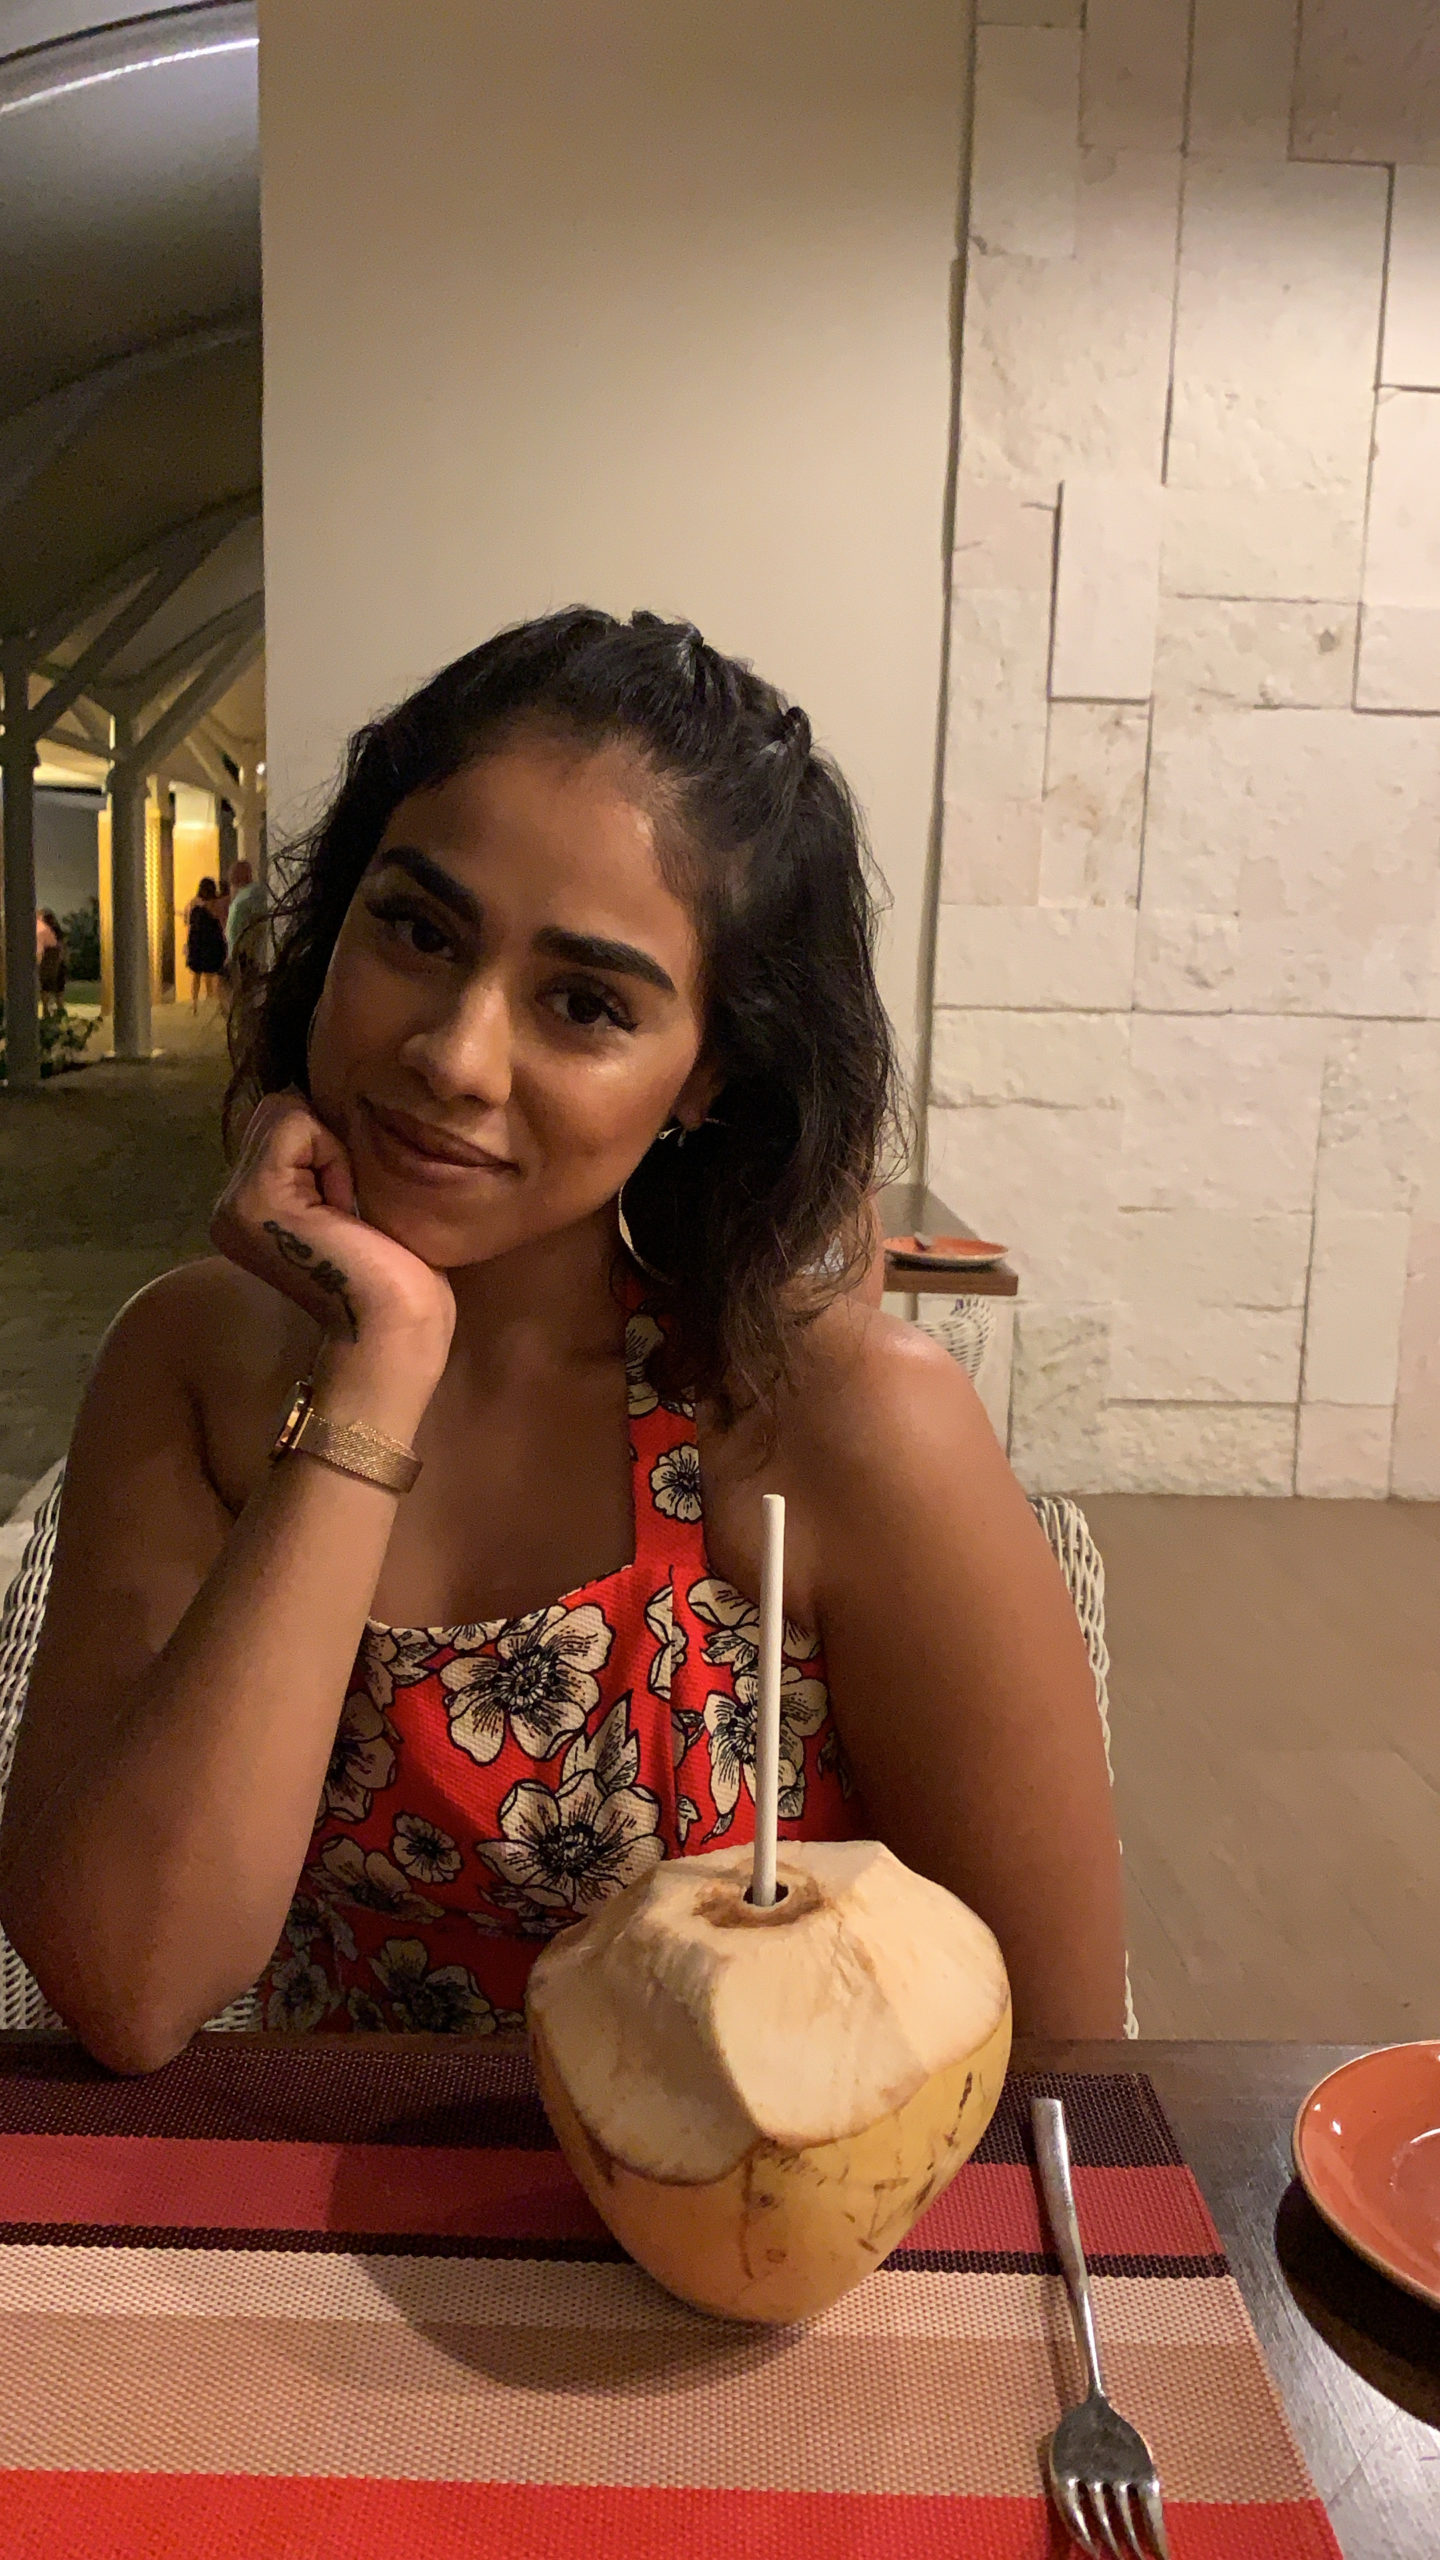 Hairdresser business owner Chan Bhasin on vacation during self-care time